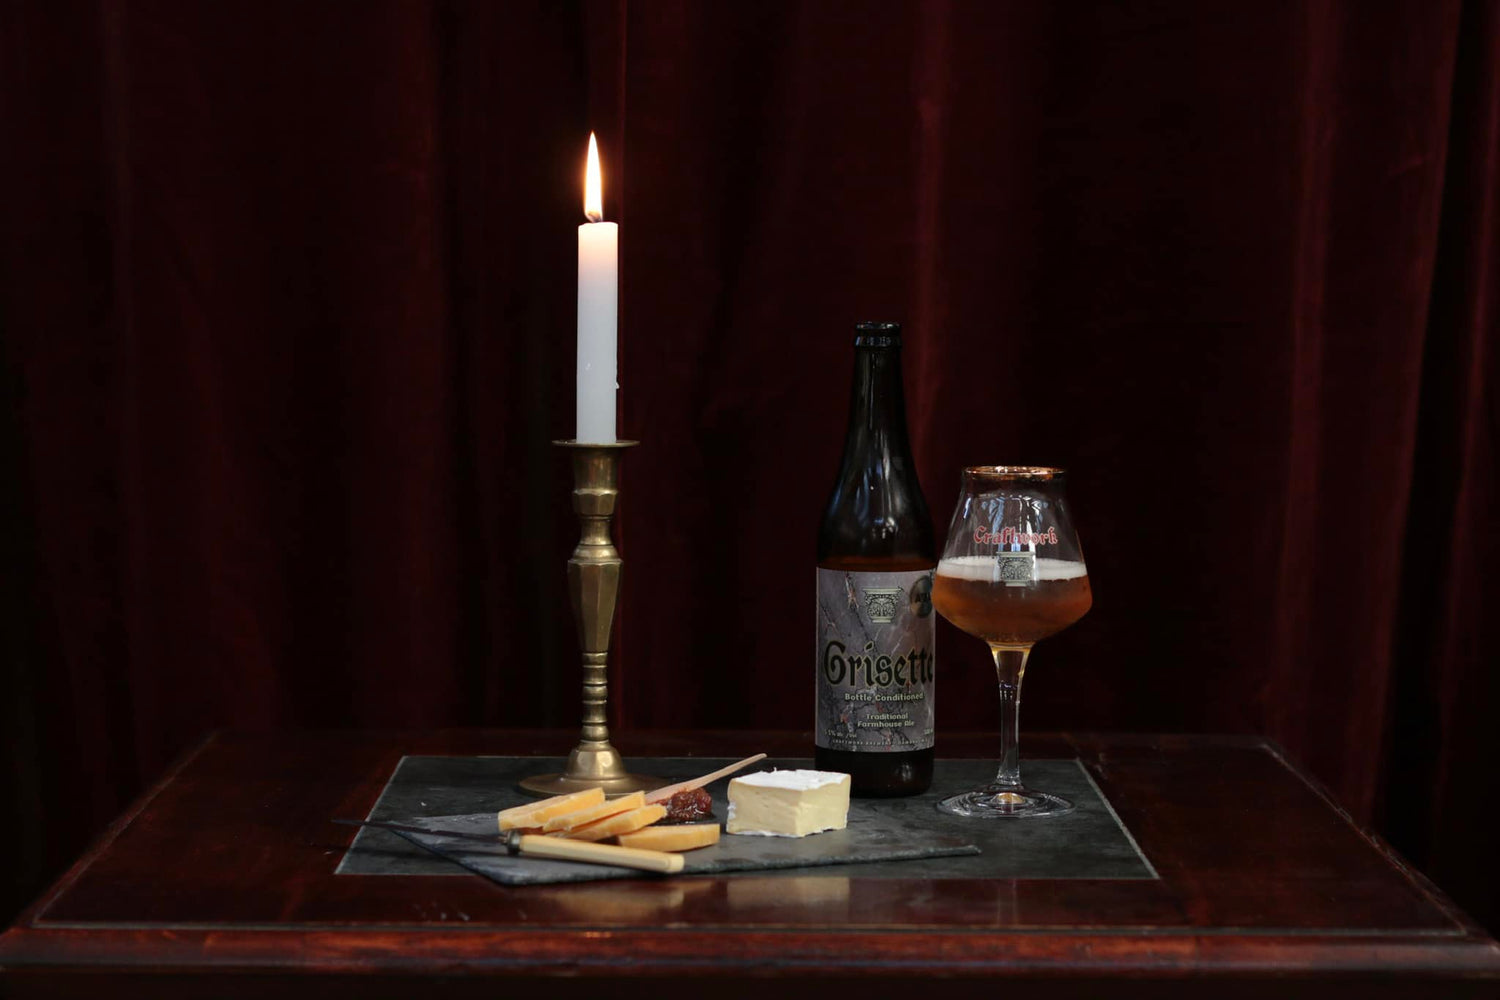 Craftwork beer and cheese platter